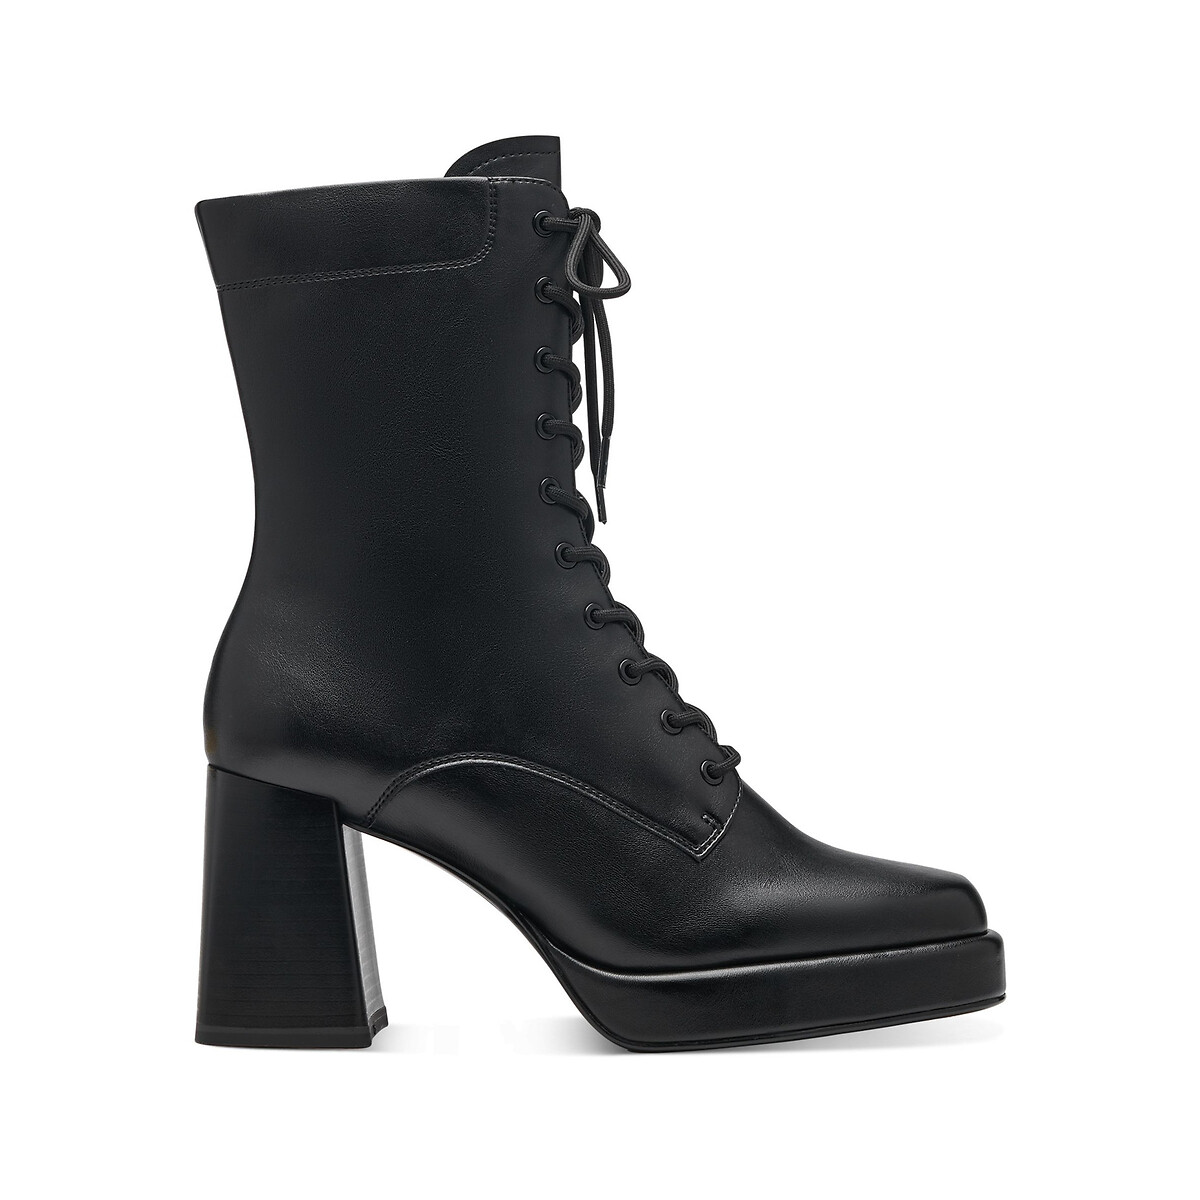 Lace-Up High Ankle Boots with Heel